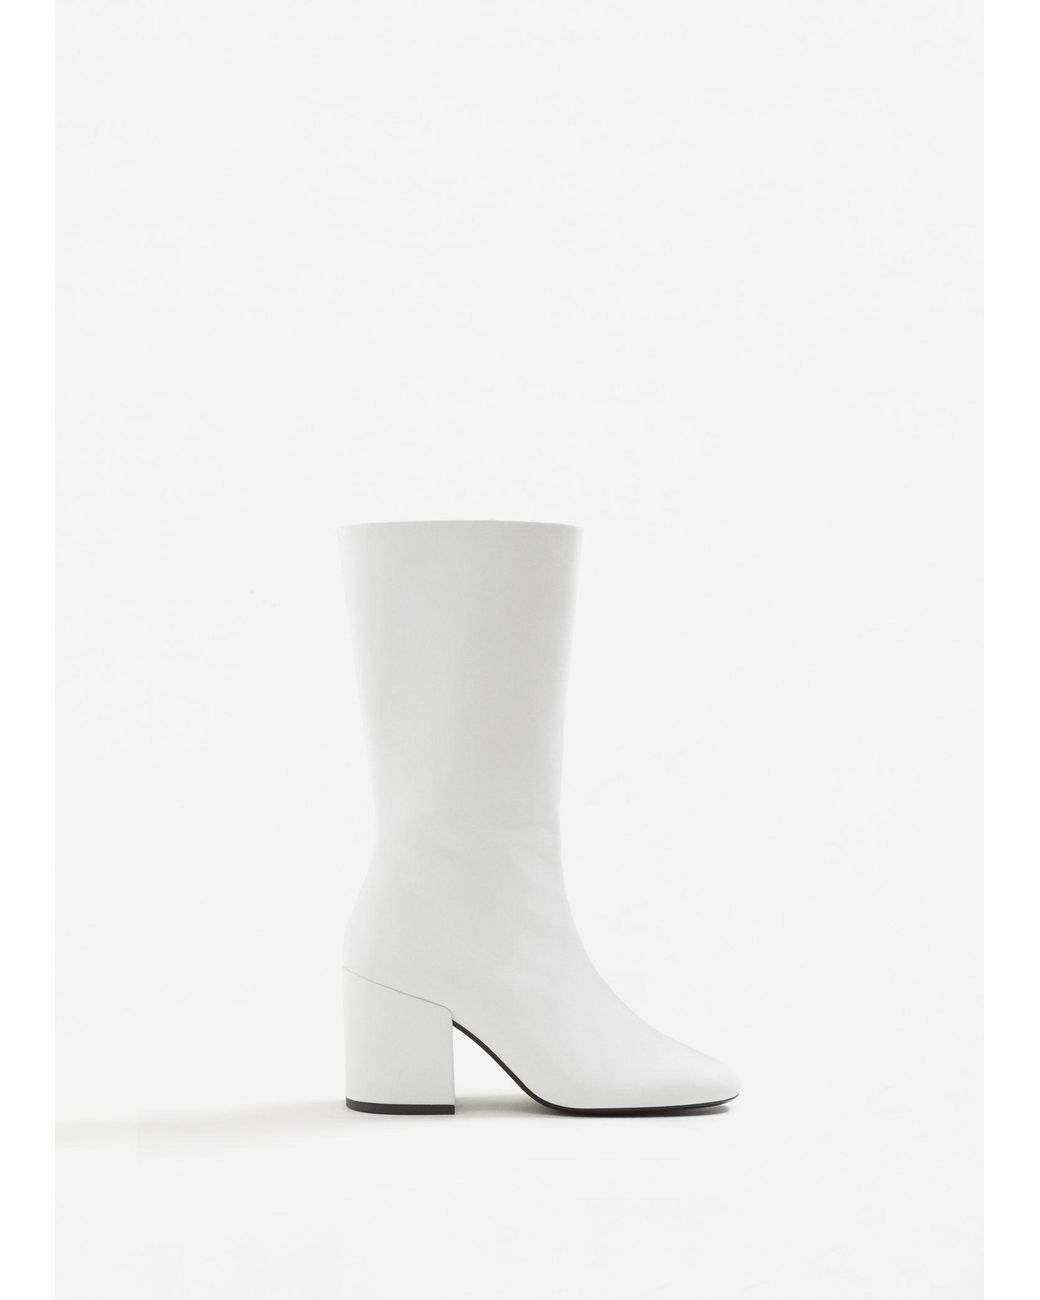 Mango Zipper Leather Boots in White | Lyst UK